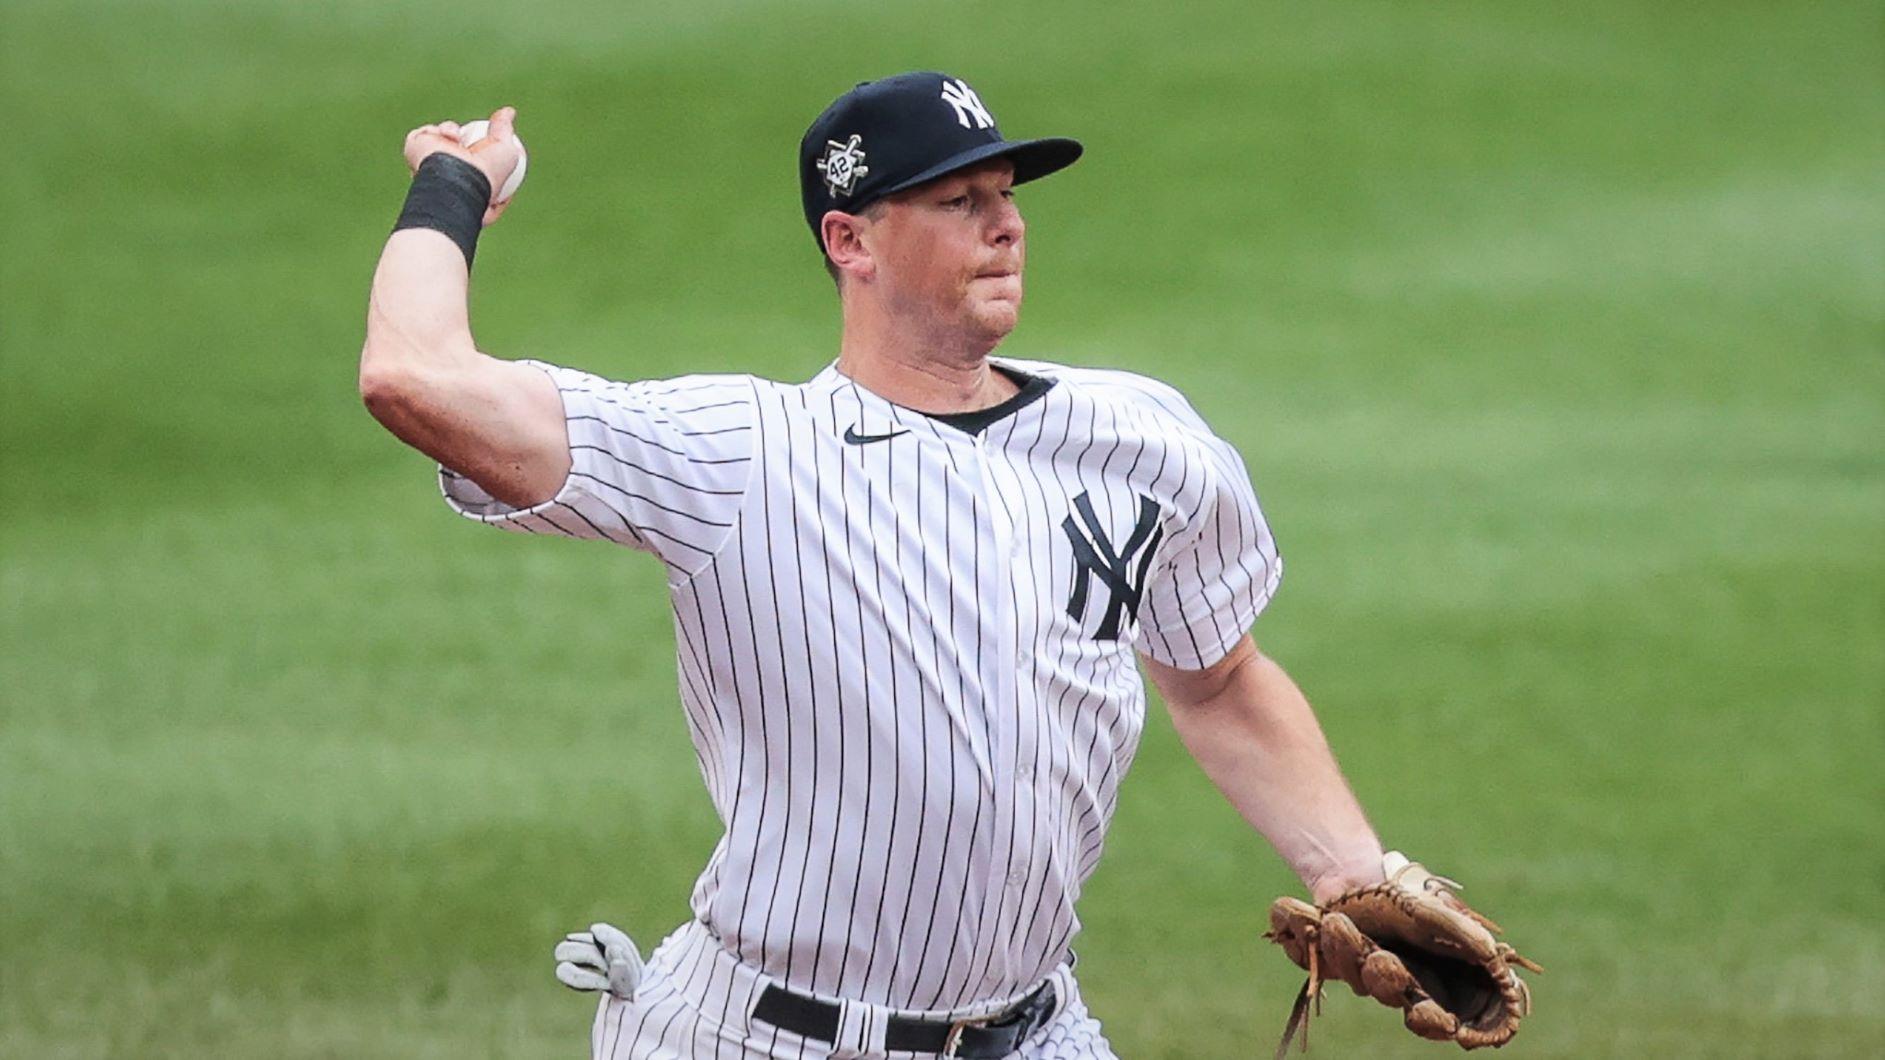 Aug 29, 2020; Bronx, New York, USA; New York Yankees second baseman DJ LeMahieu throws the ball to first base for an out during the first inning against the New York Mets at Yankee Stadium. Mandatory Credit: Vincent Carchietta-USA TODAY Sports / Vincent Carchietta - USA TODAY Sports